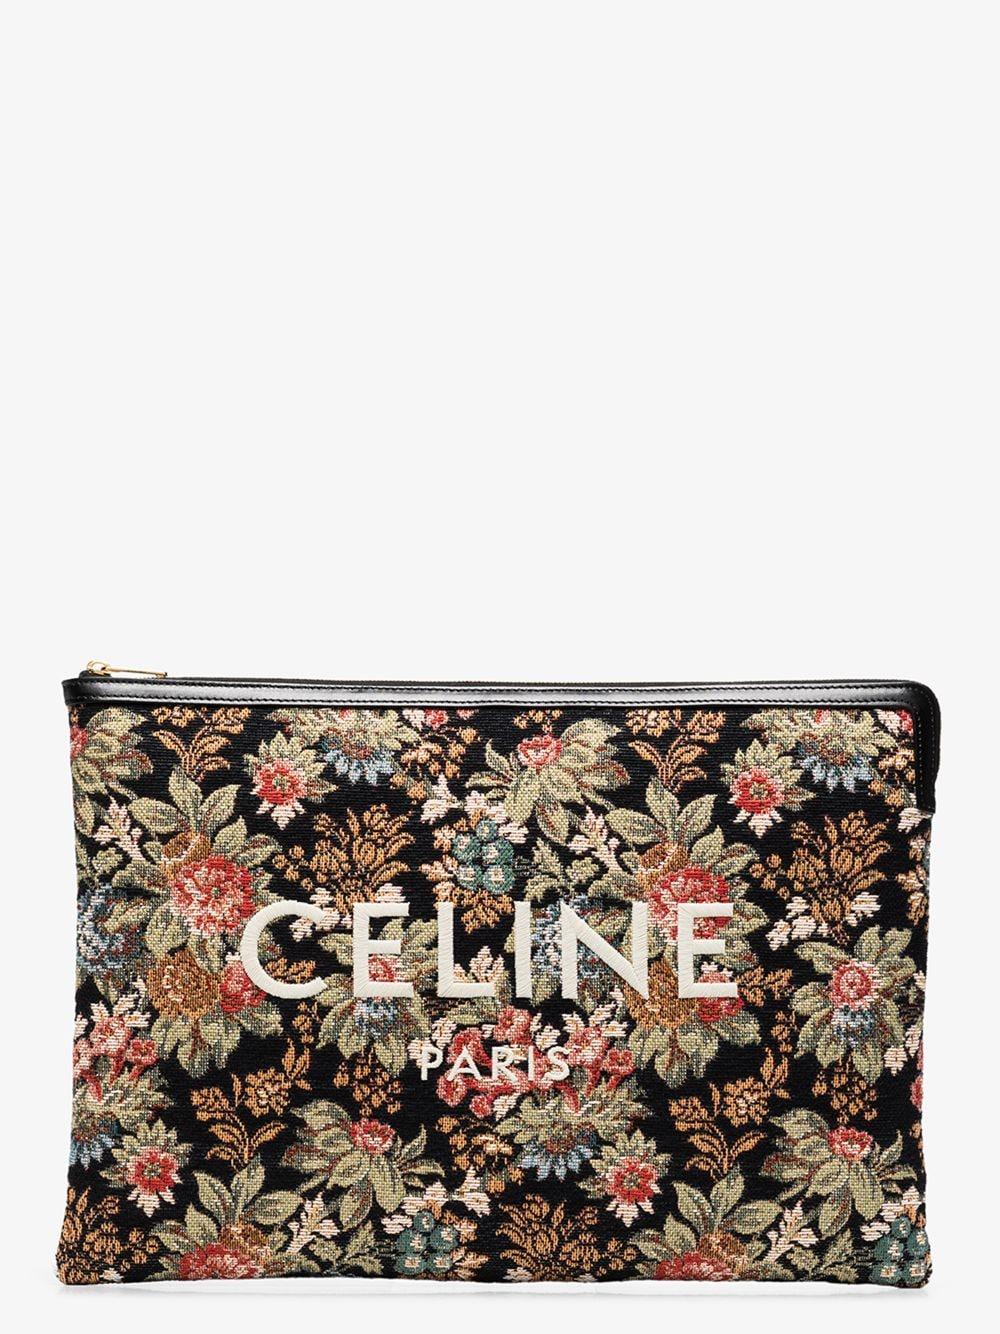 Celine Multicoloured Floral Tapestry Cotton Logo Clutch in Black | Lyst